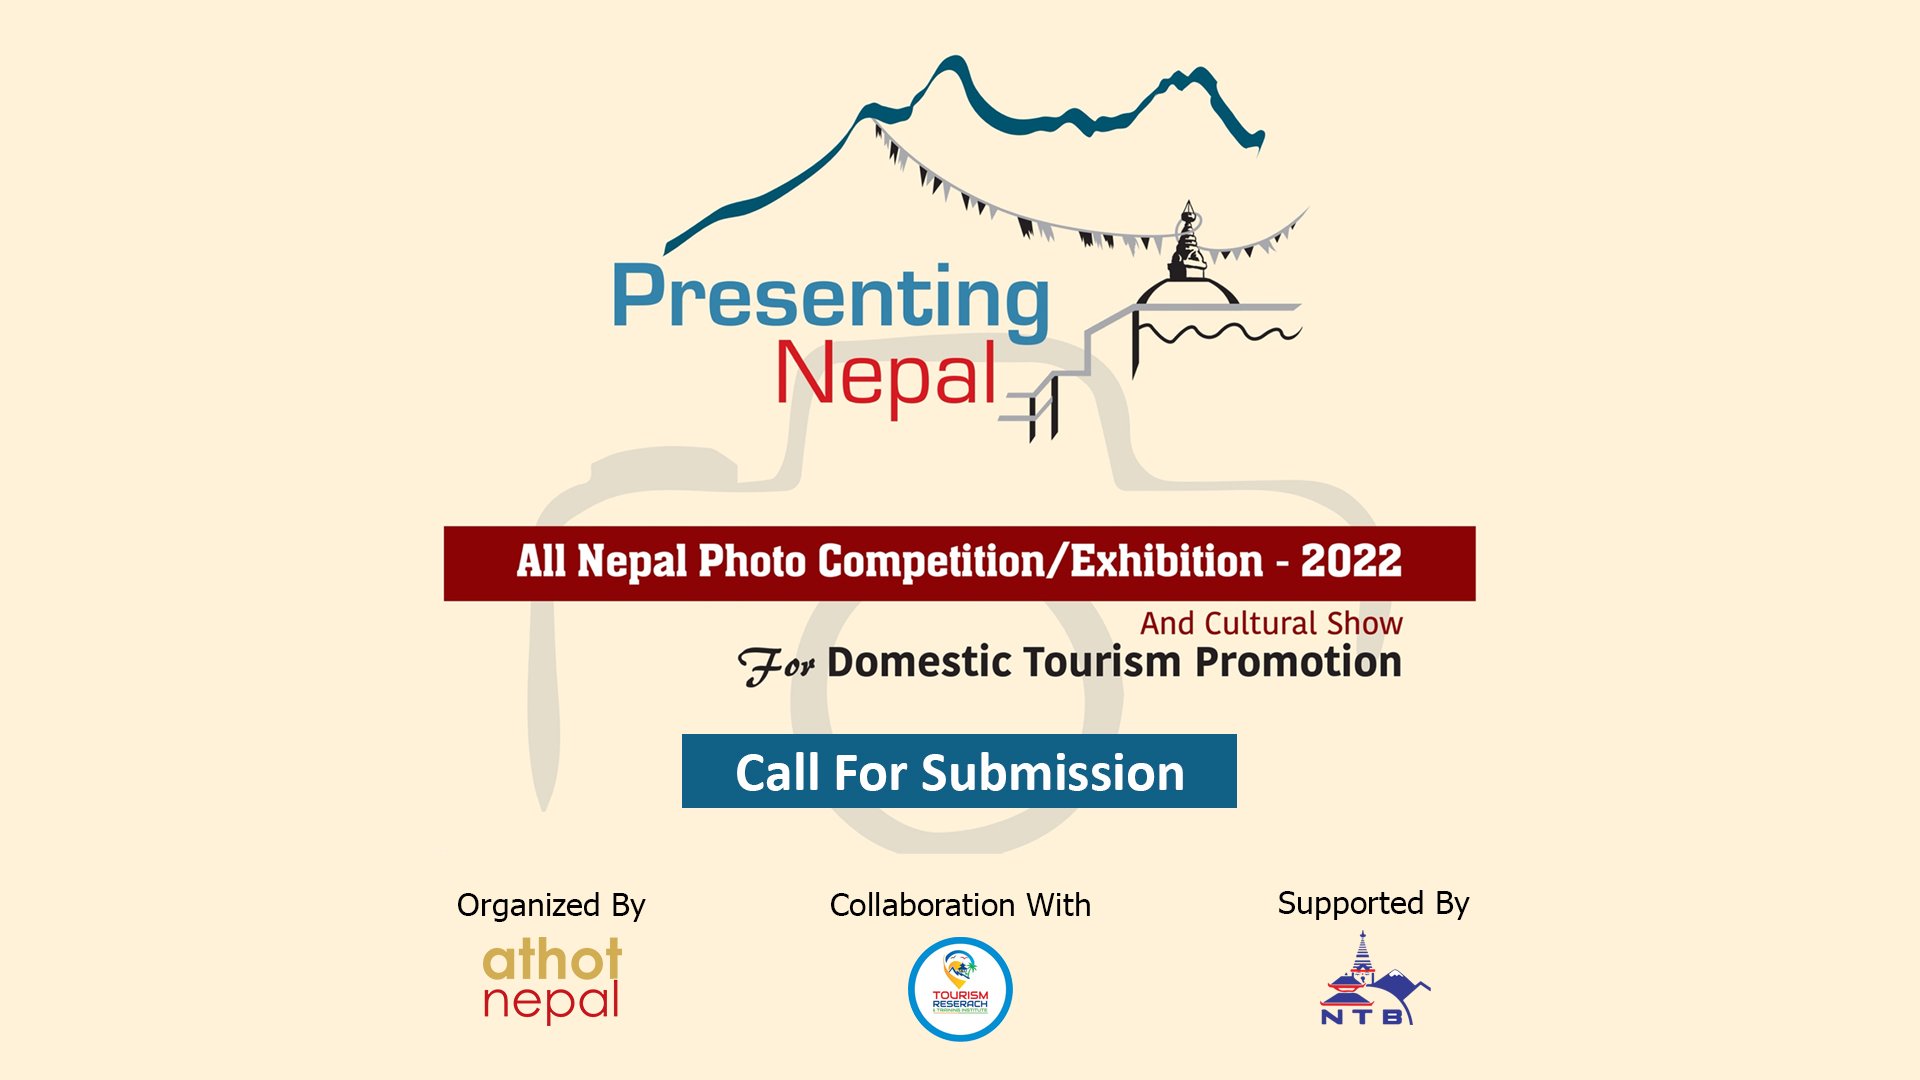 Presenting Nepal Photo Competition 2022